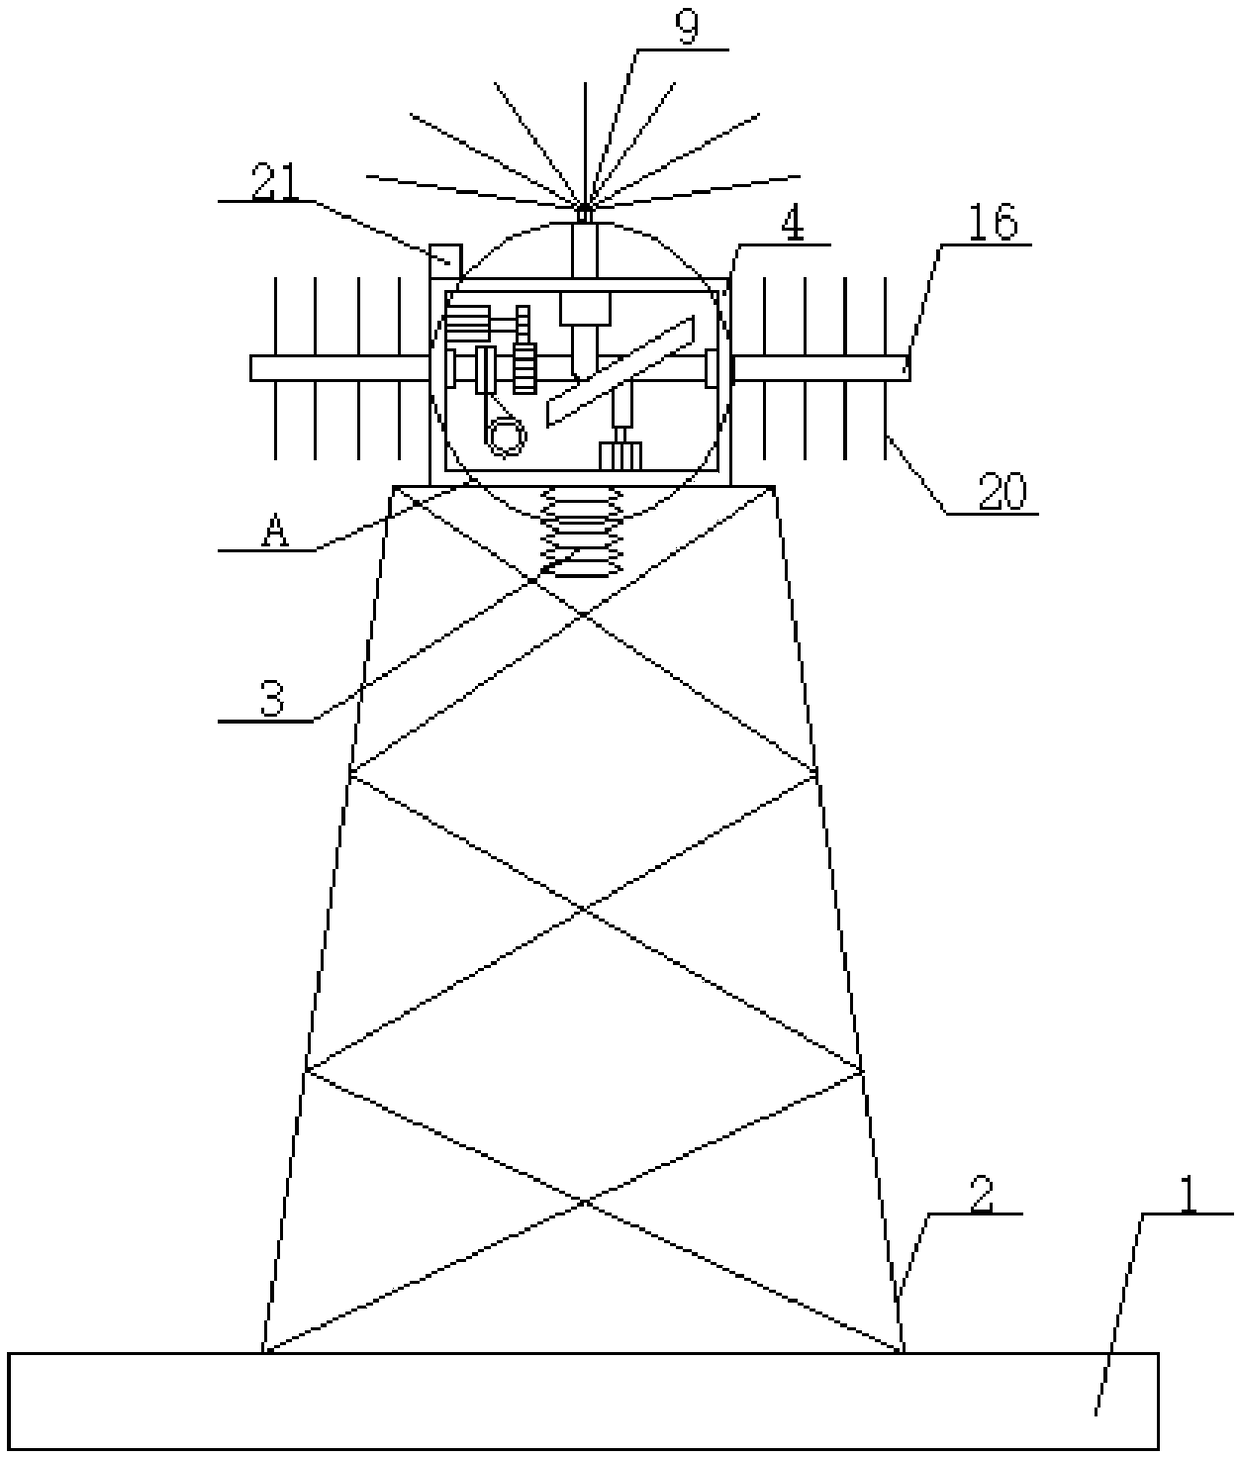 A communication tower with enhanced bird damage prevention function